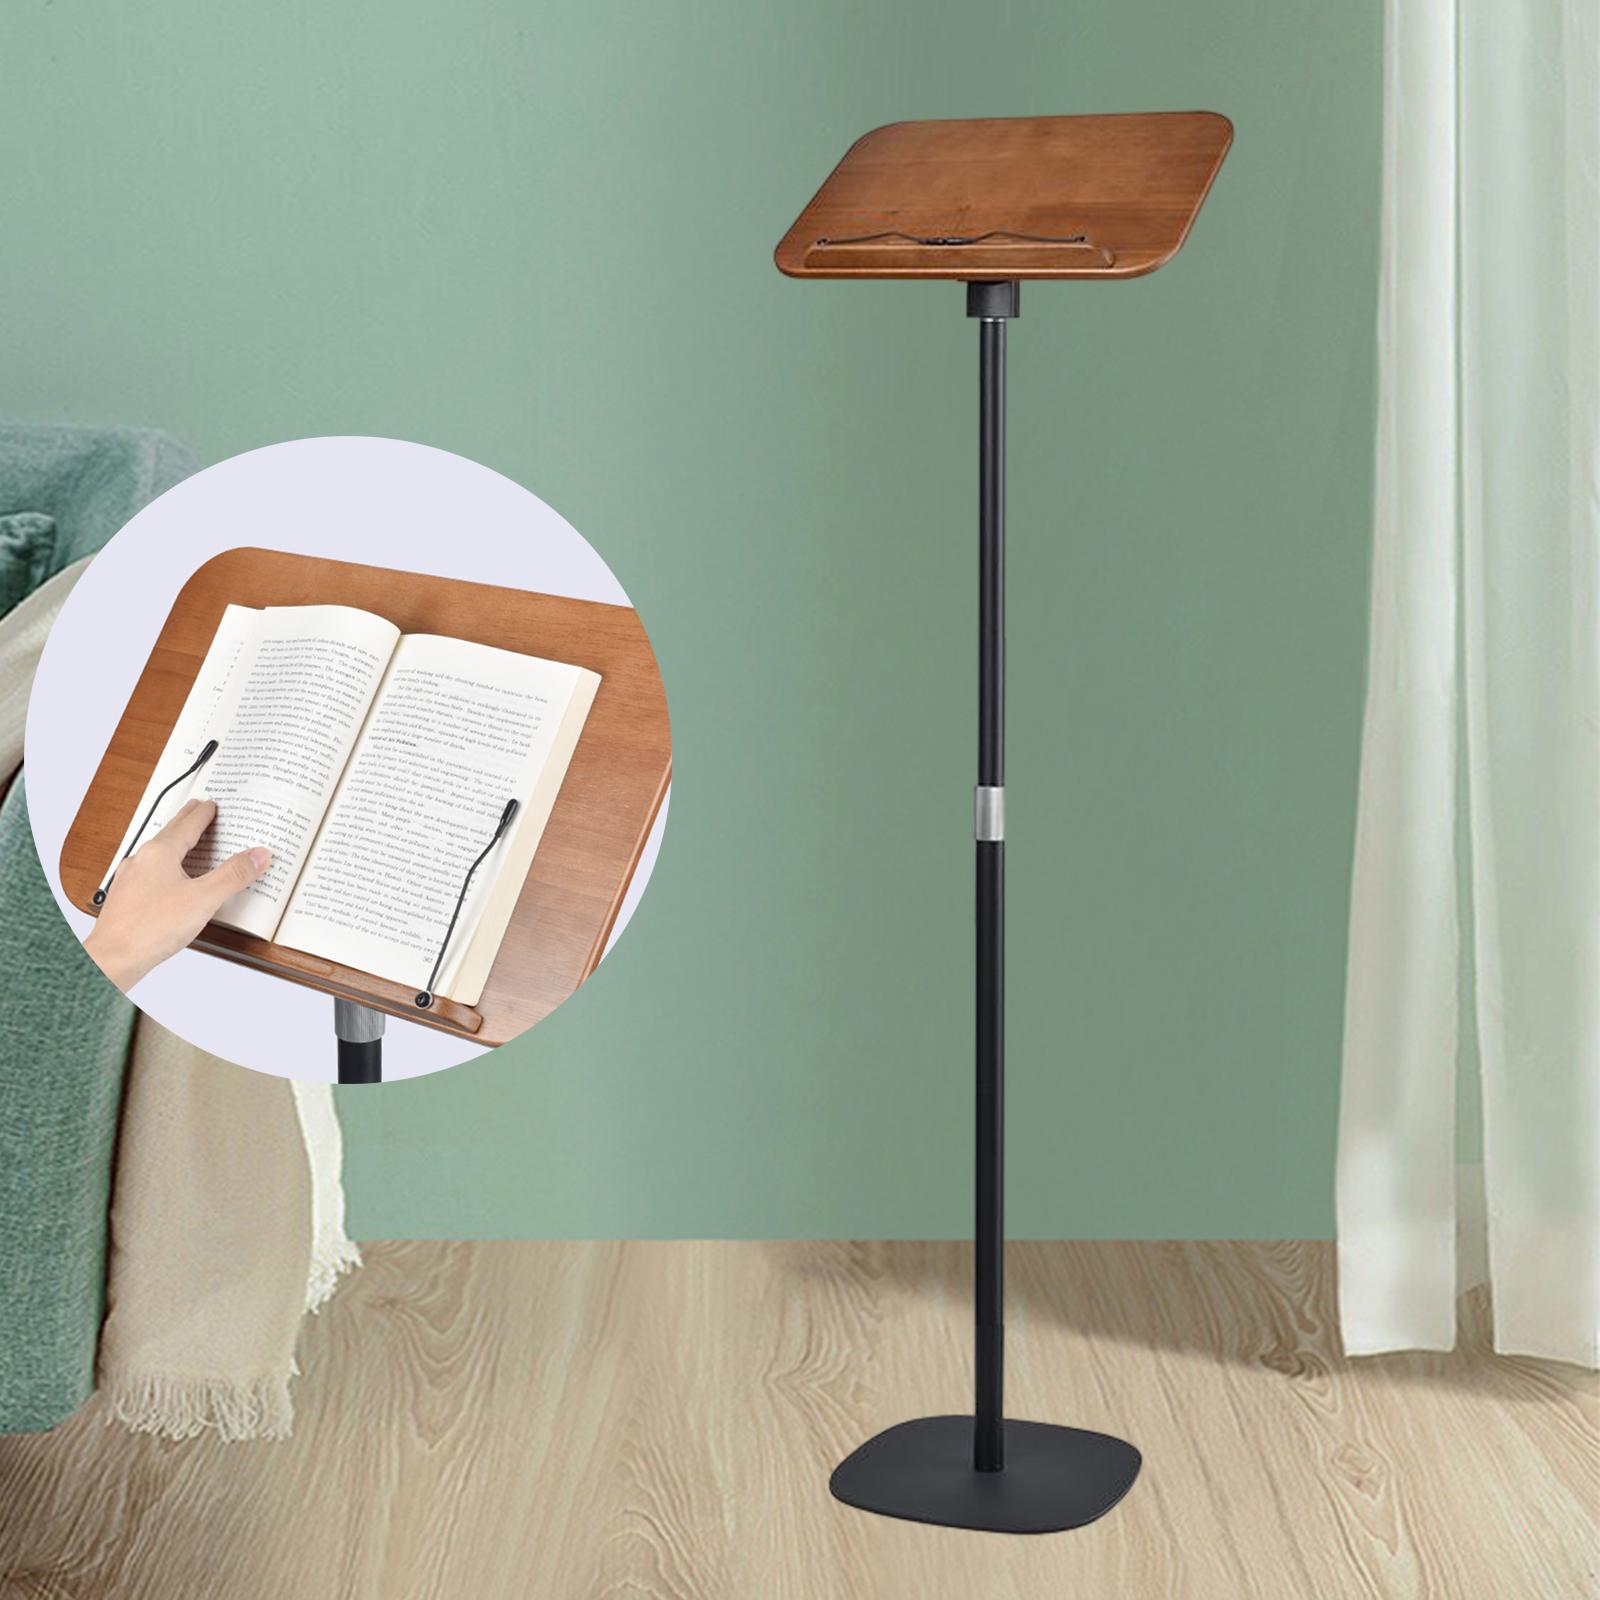 Floor Book Stand for Reading Metal Support for Home Office kitchen Heightening